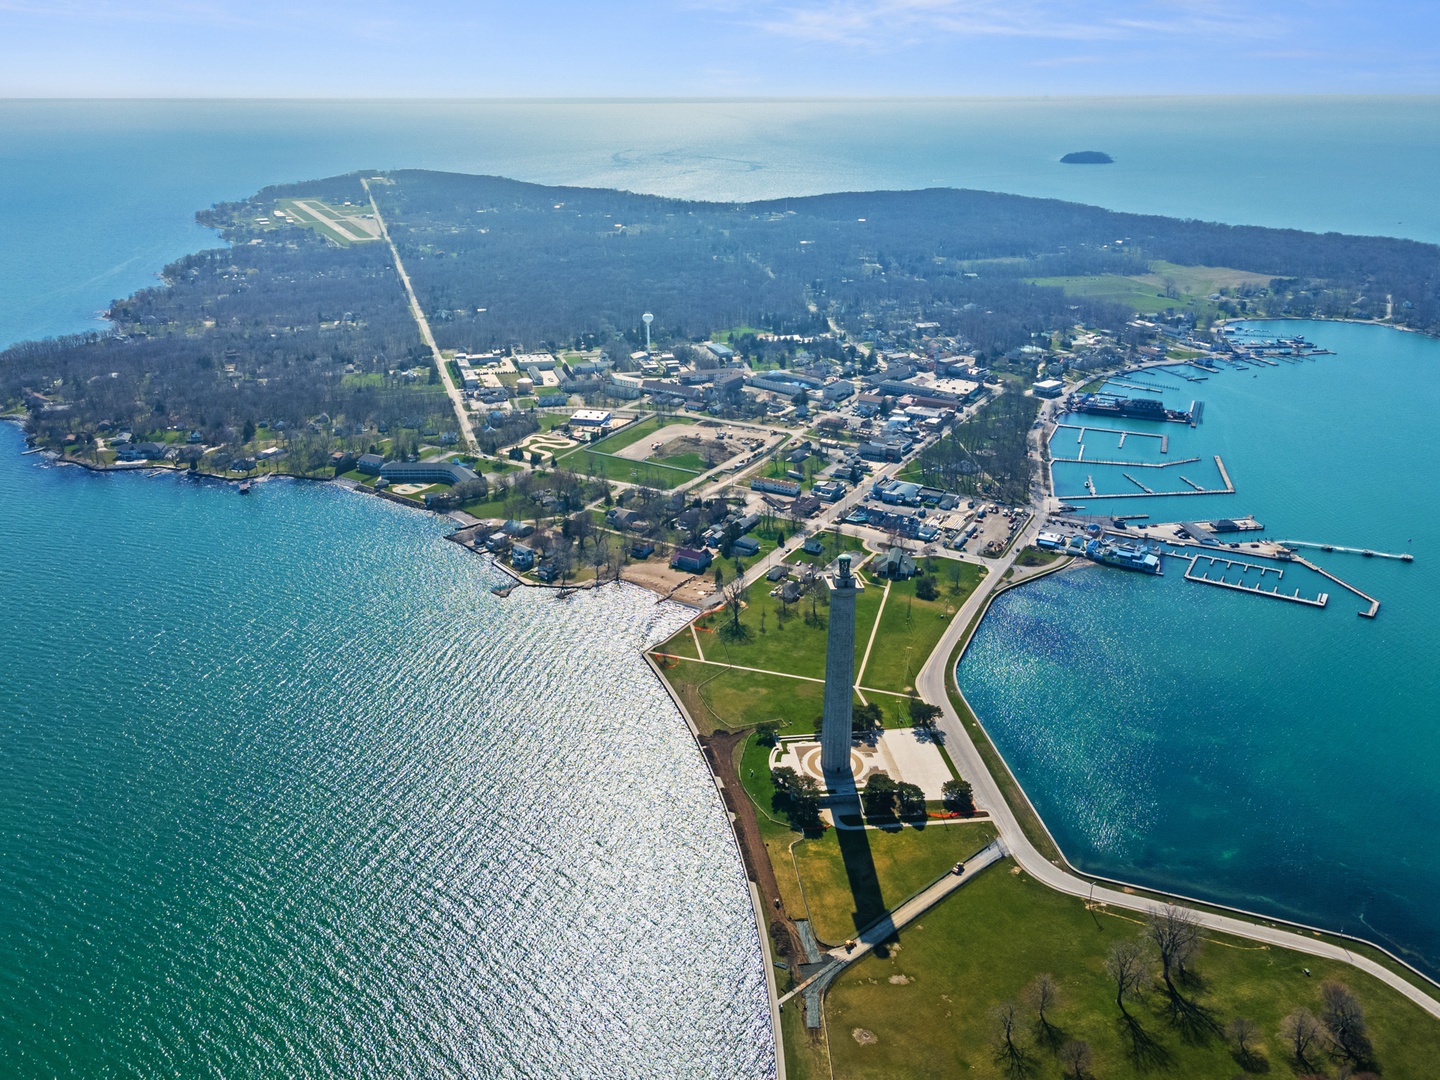 Indulge in a luxurious island getaway at Bayshore Resort on Put-in-Bay